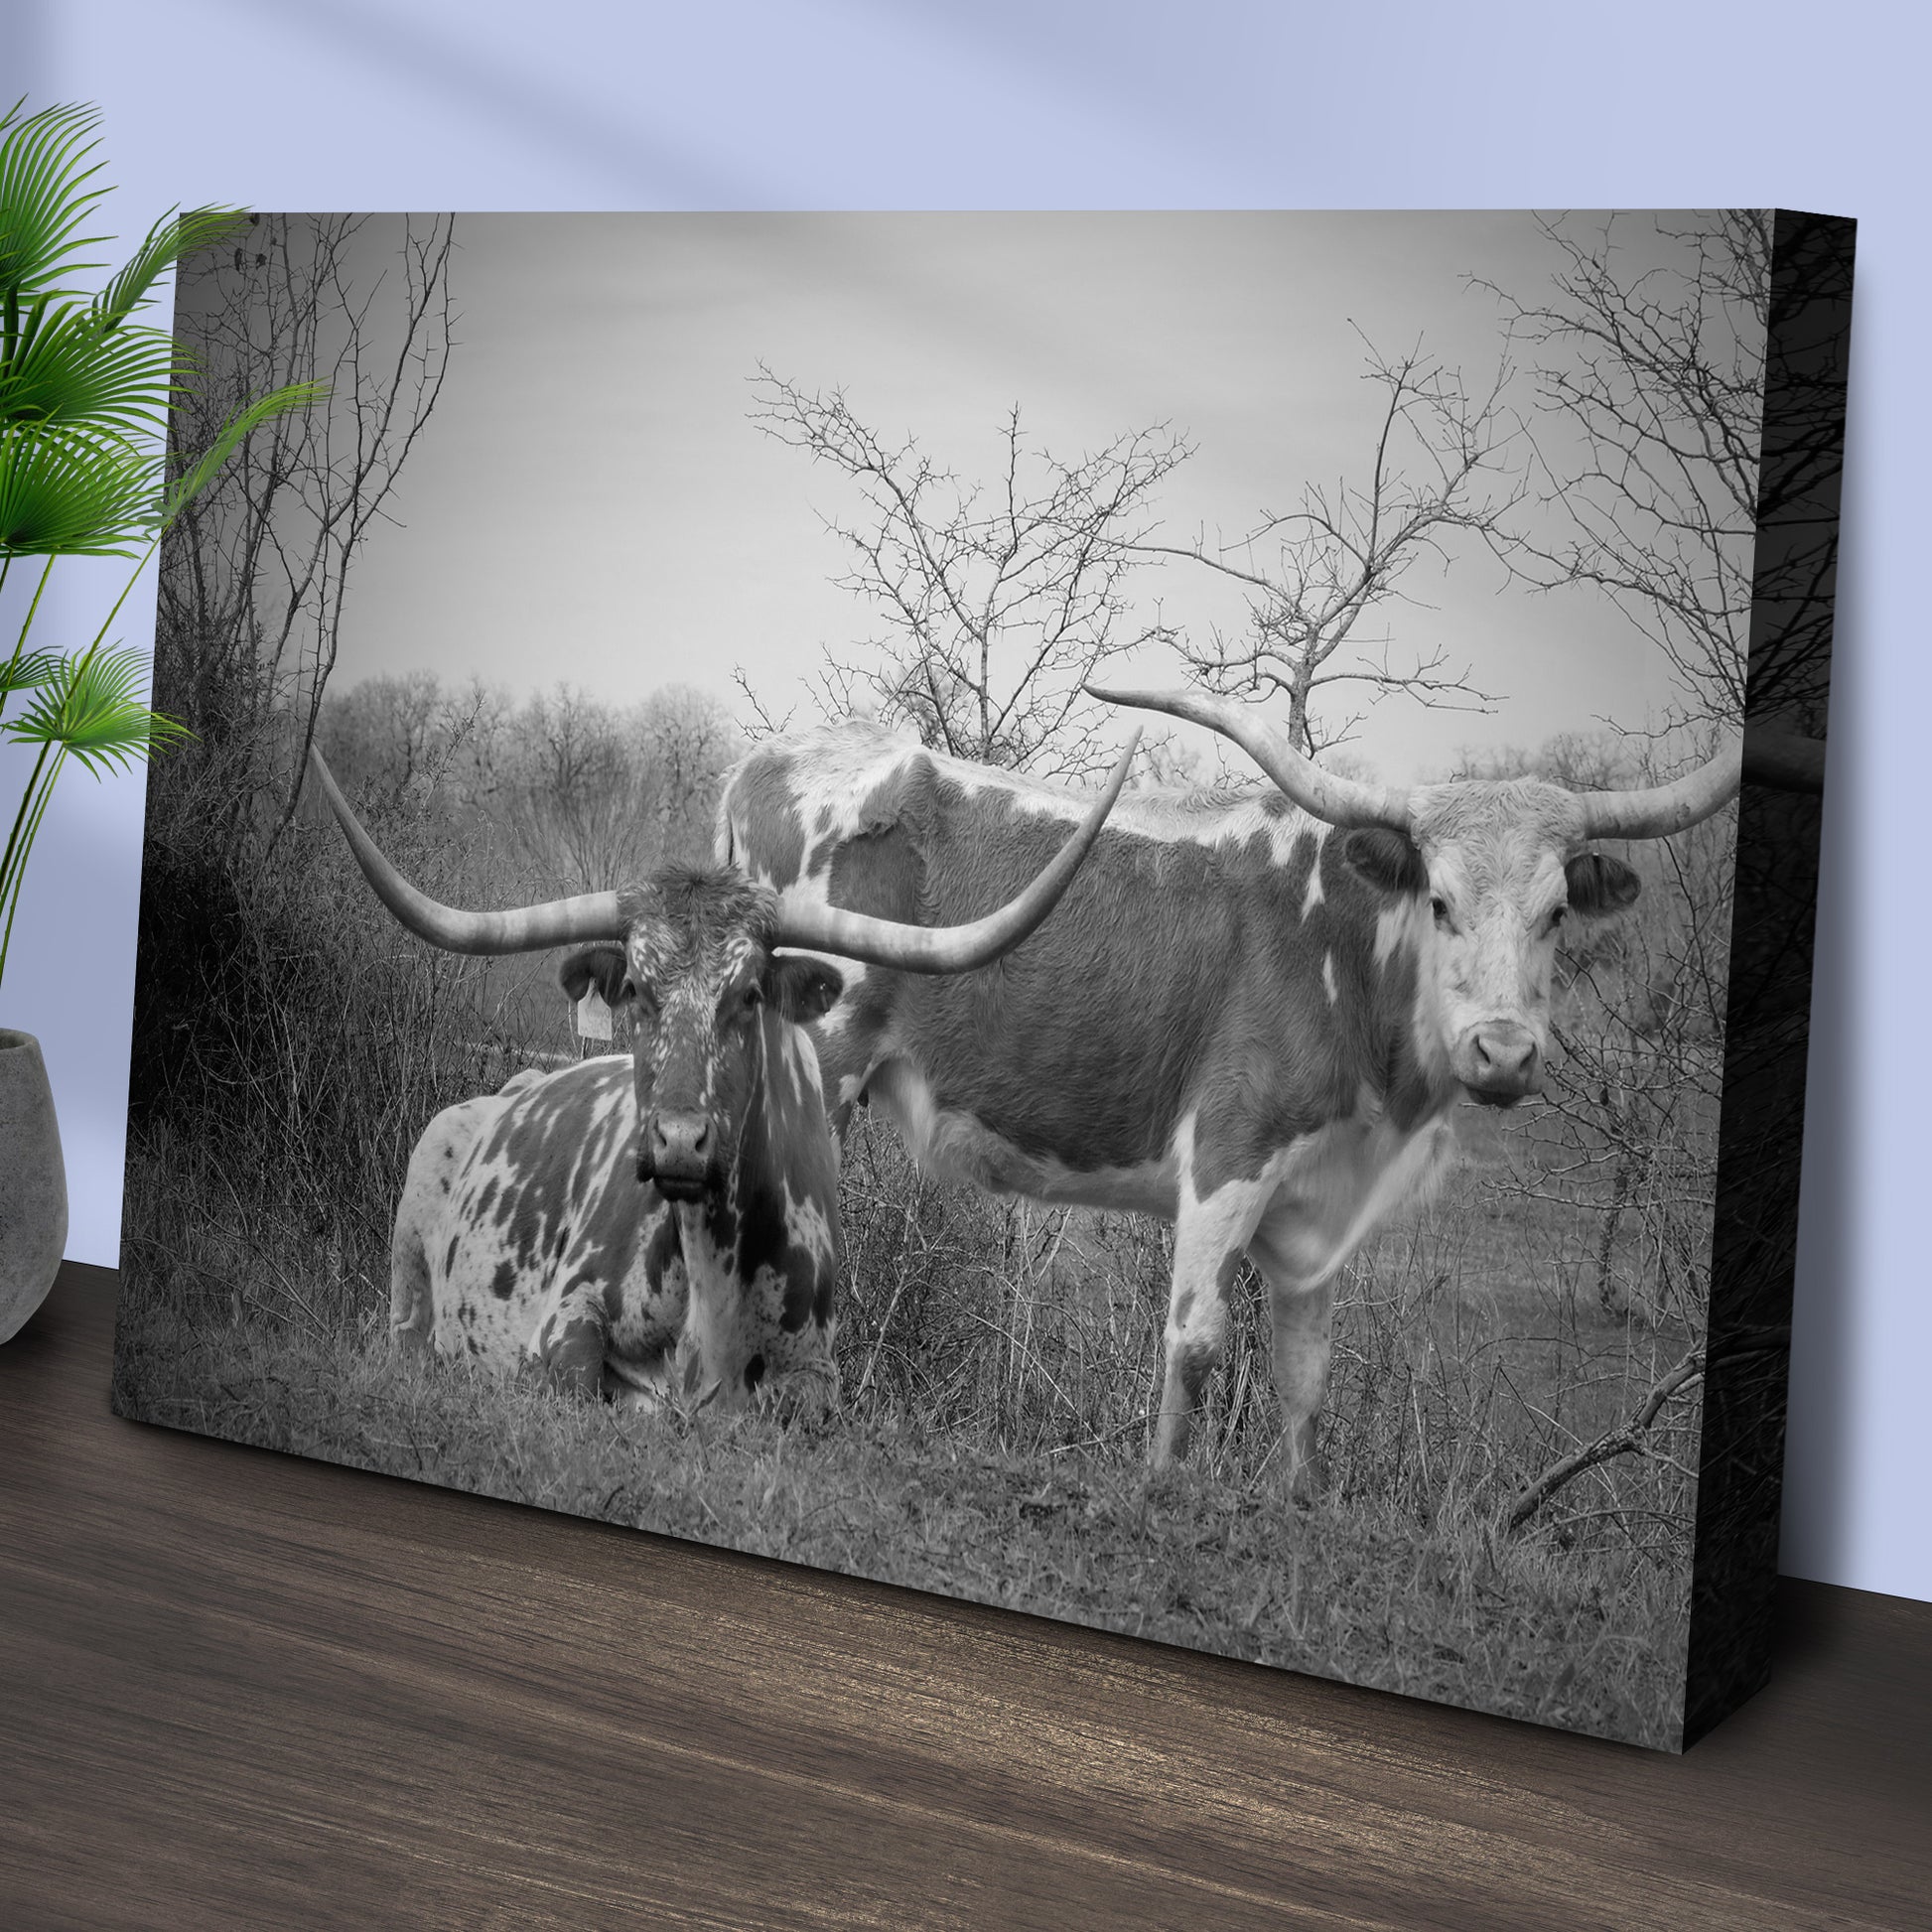 Monochrome Texas Longhorn Cattle Canvas Wall Art Style 1 - Image by Tailored Canvases